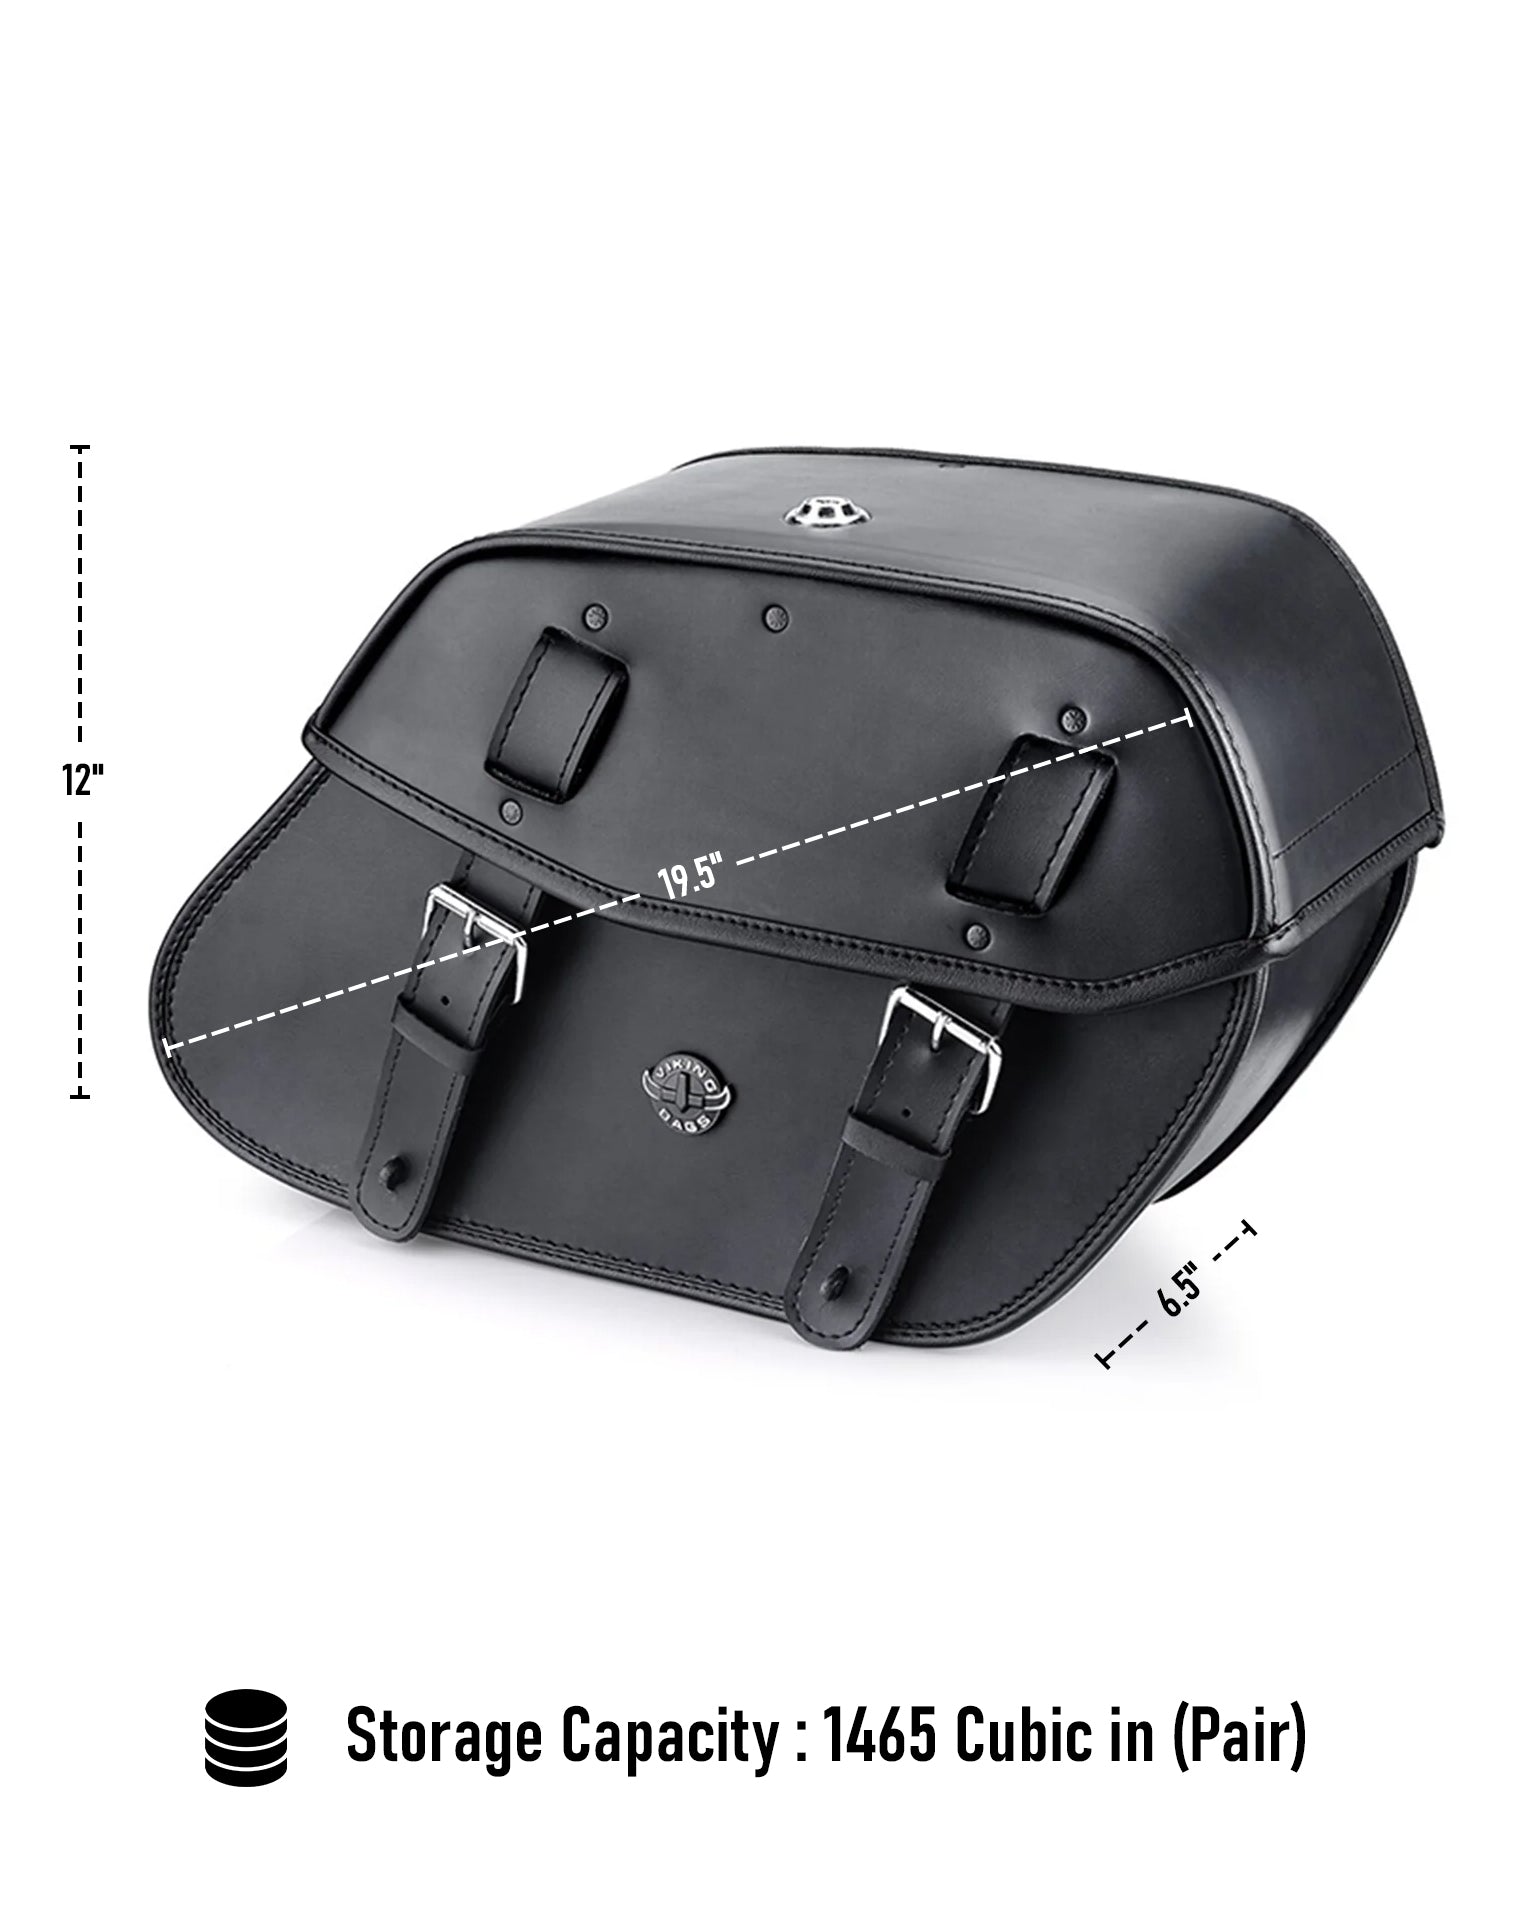 Viking Odin Large Suzuki Boulevard C90 Vl1500 Leather Motorcycle Saddlebags Can Store Your Ridings Gears